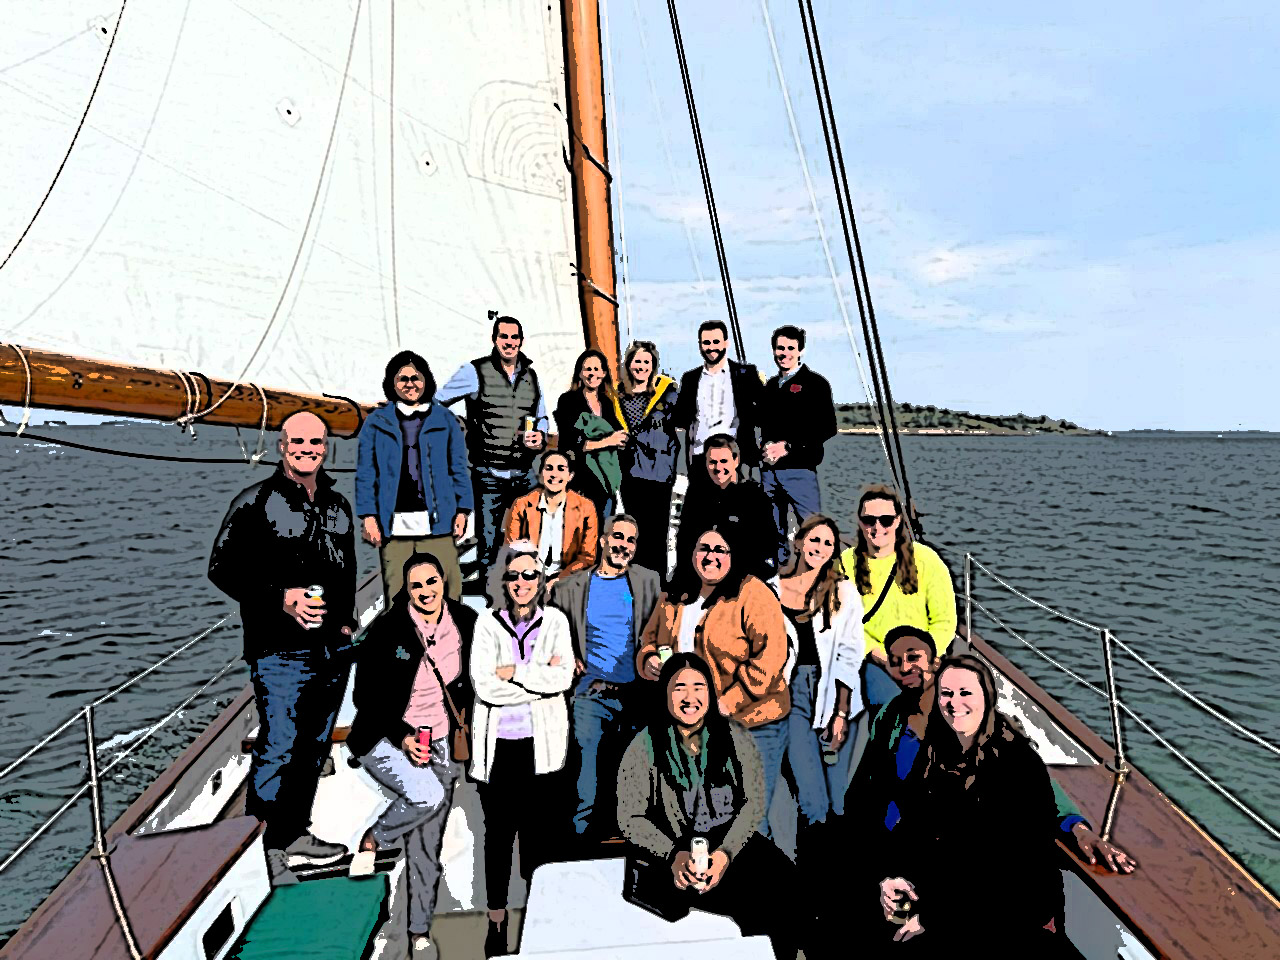 Sci.bio team outing on a boat